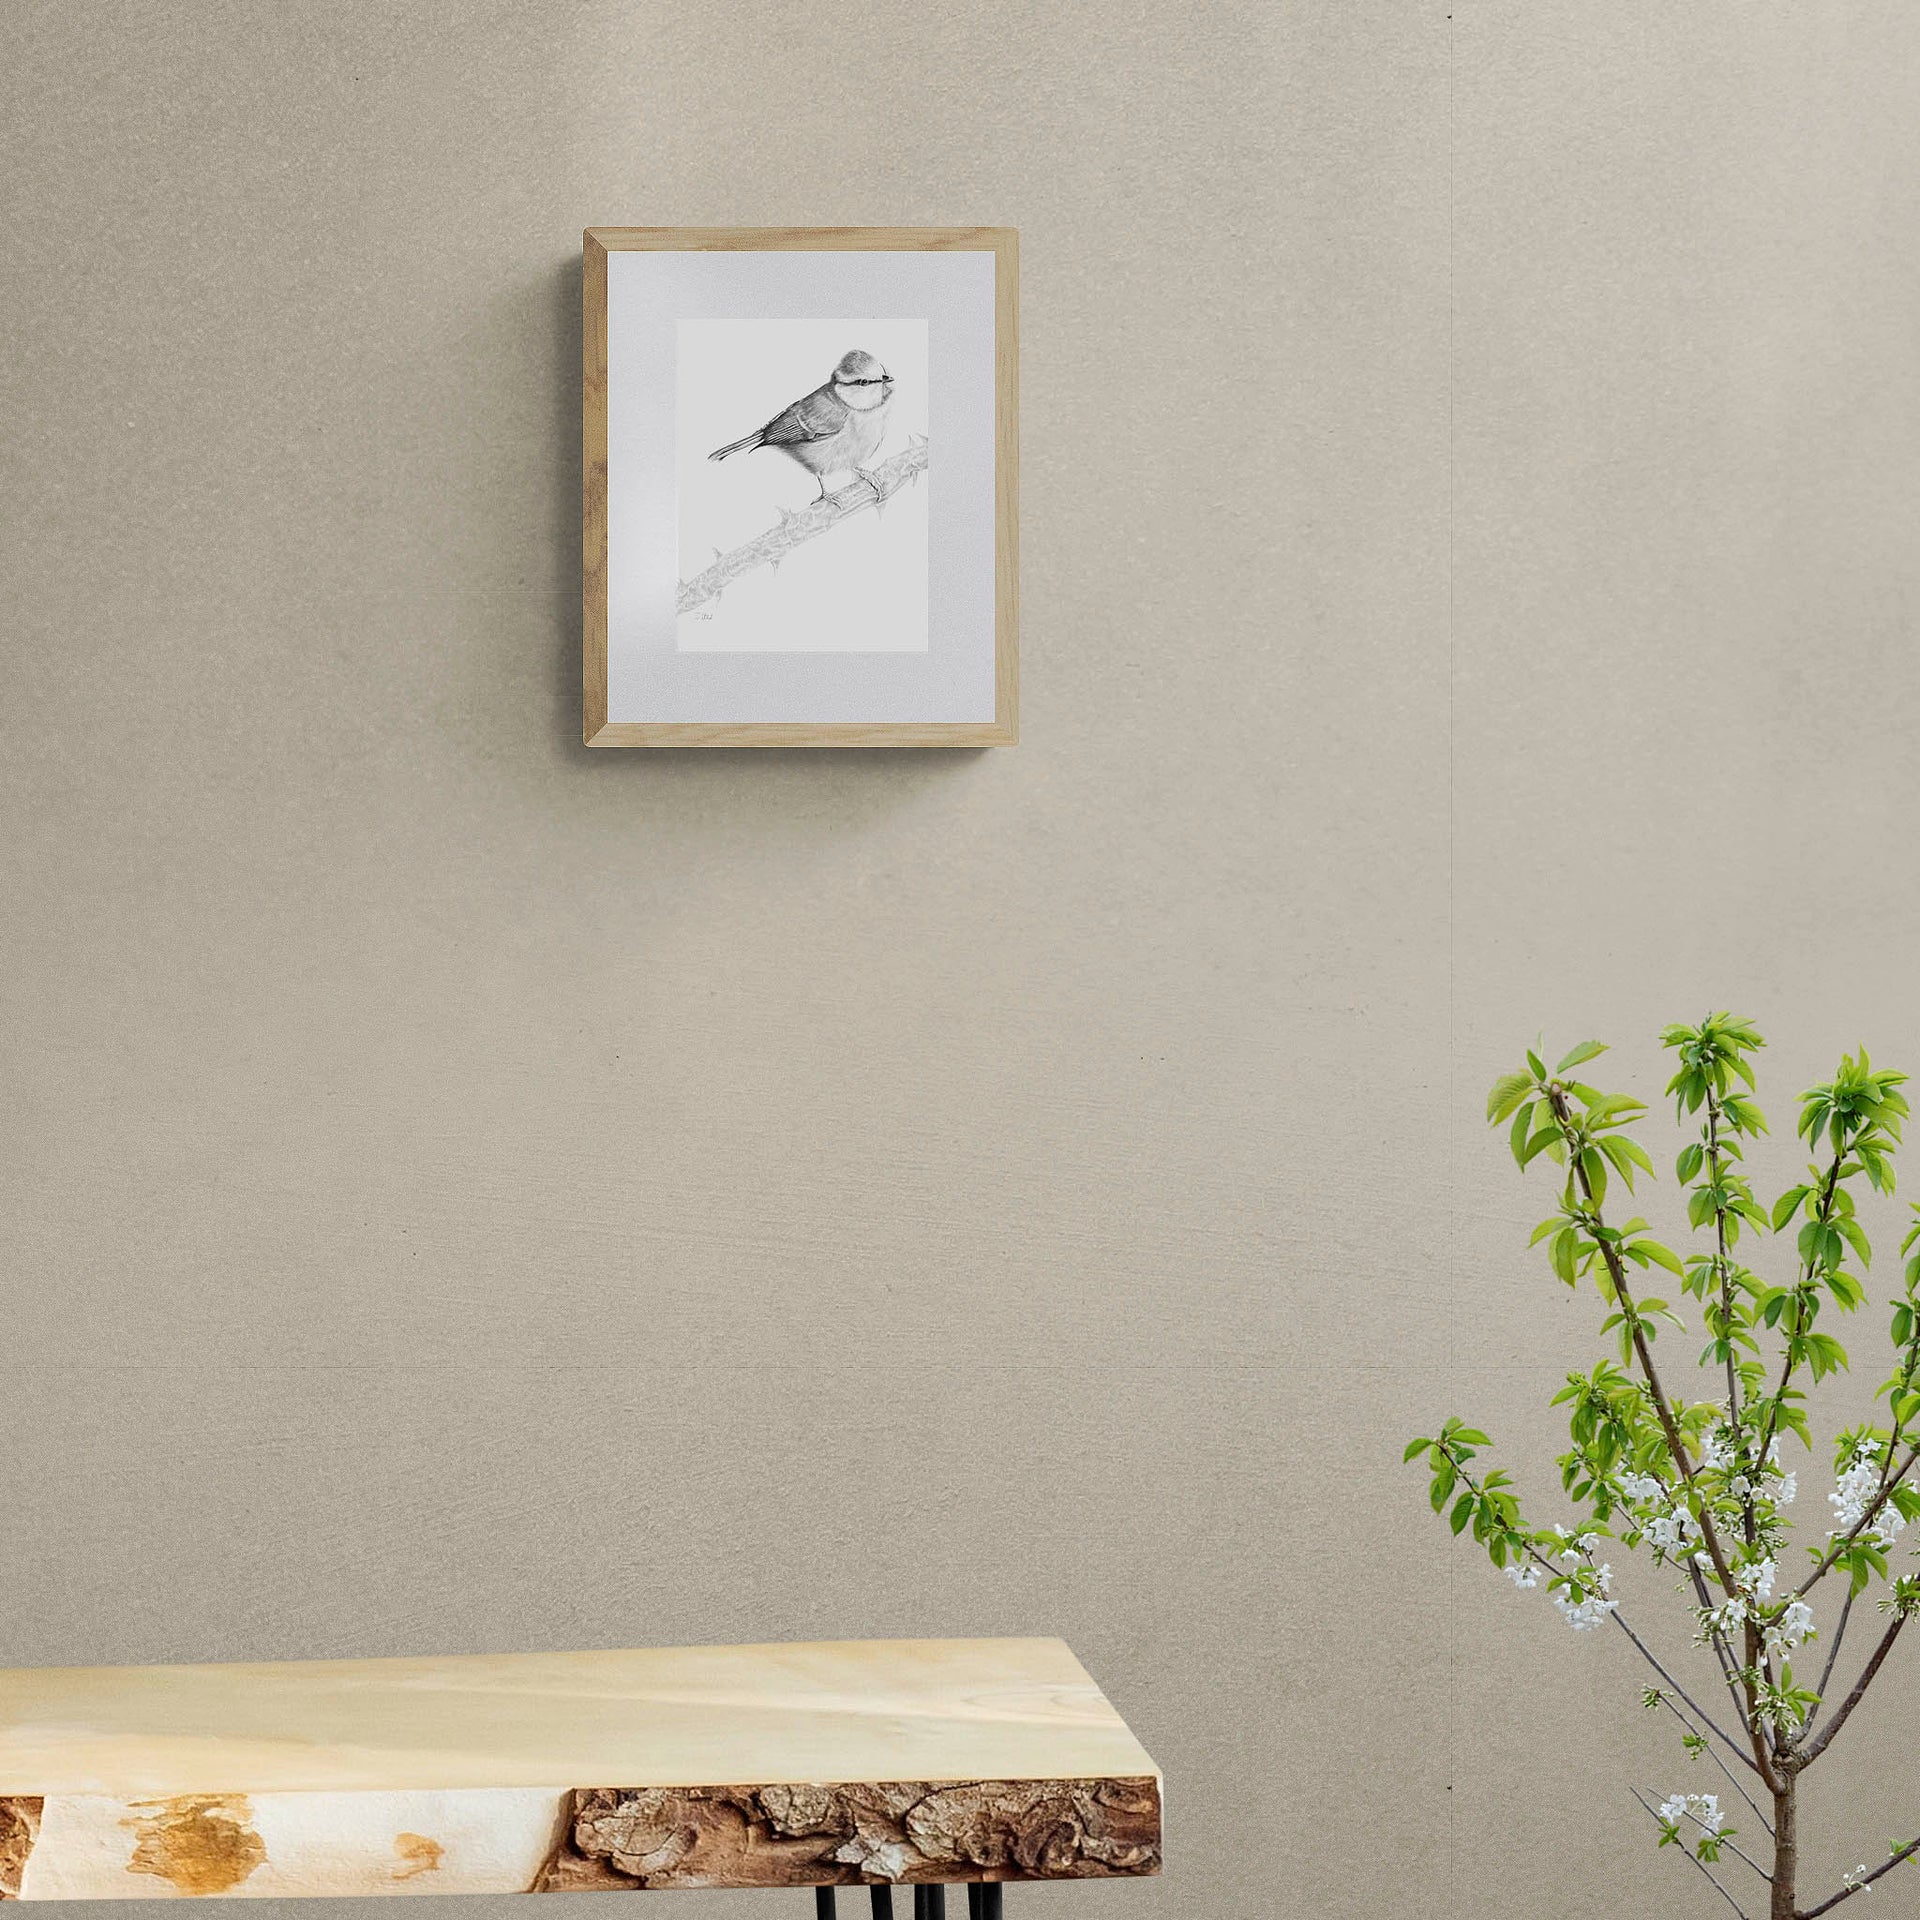 Blue tit pencil drawing print in frame on the wall